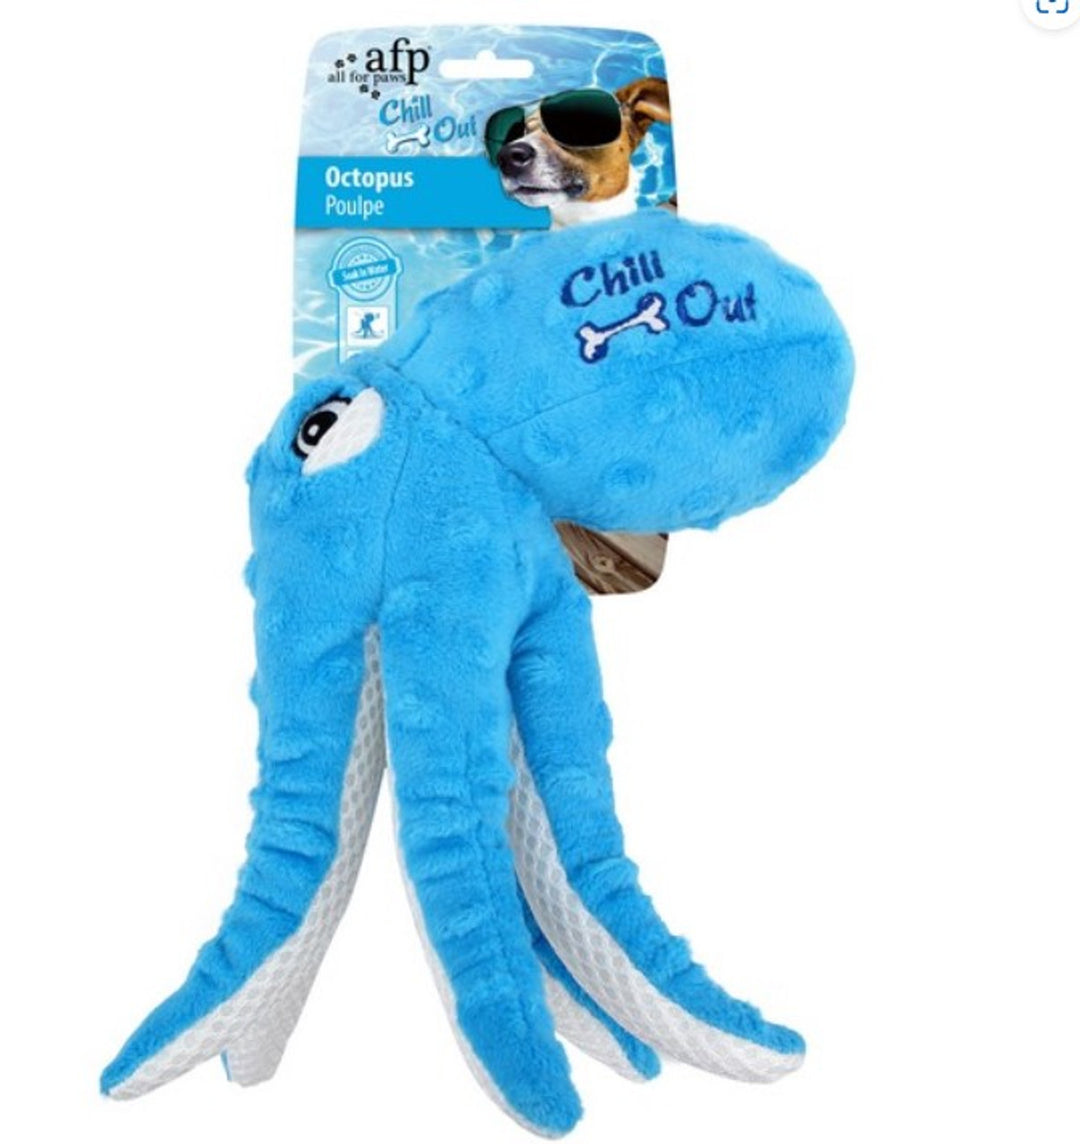 Chill out cooling toy Octopus